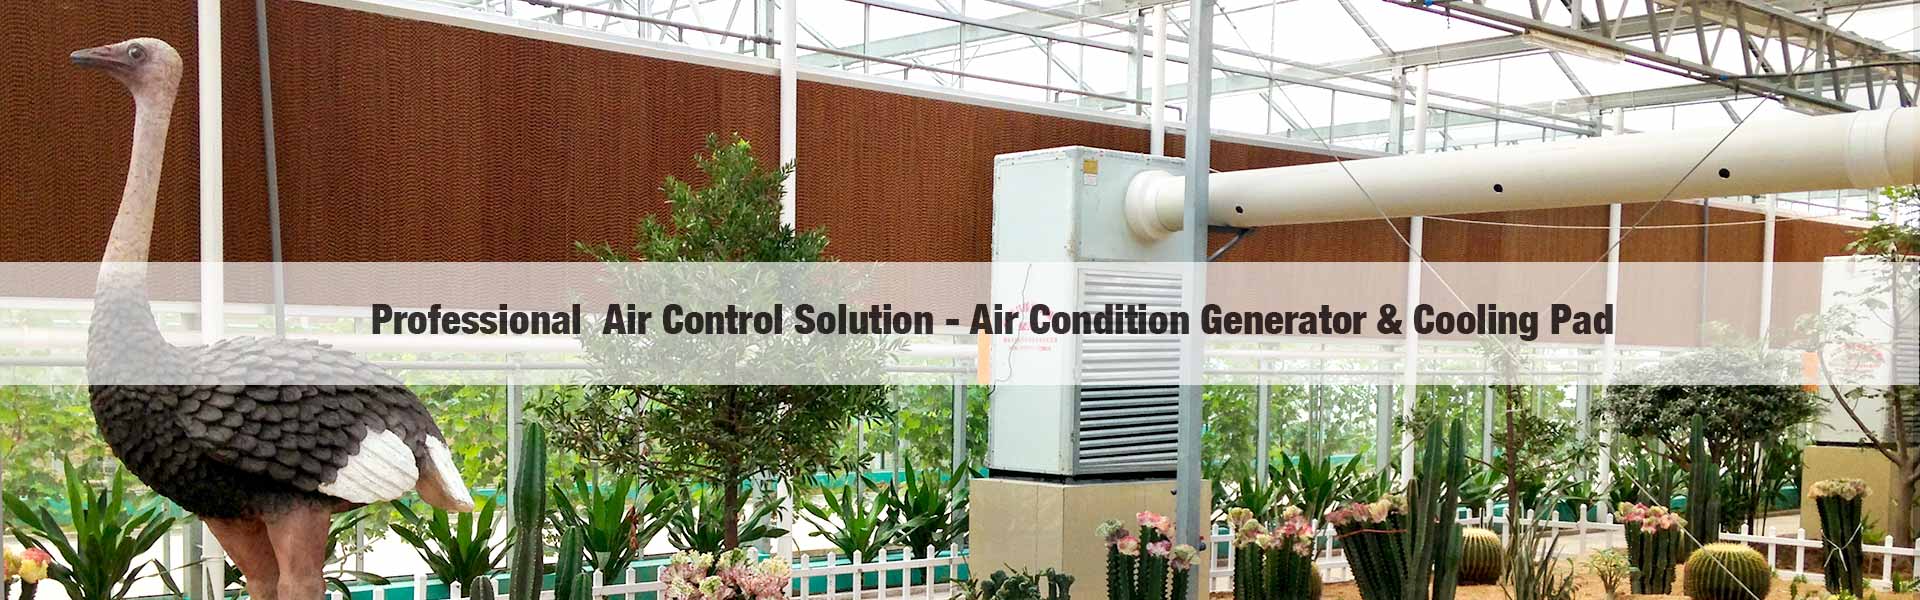 Evaporative cooling pad system for greenhouses, flower planting , vegetable planting and public buildings